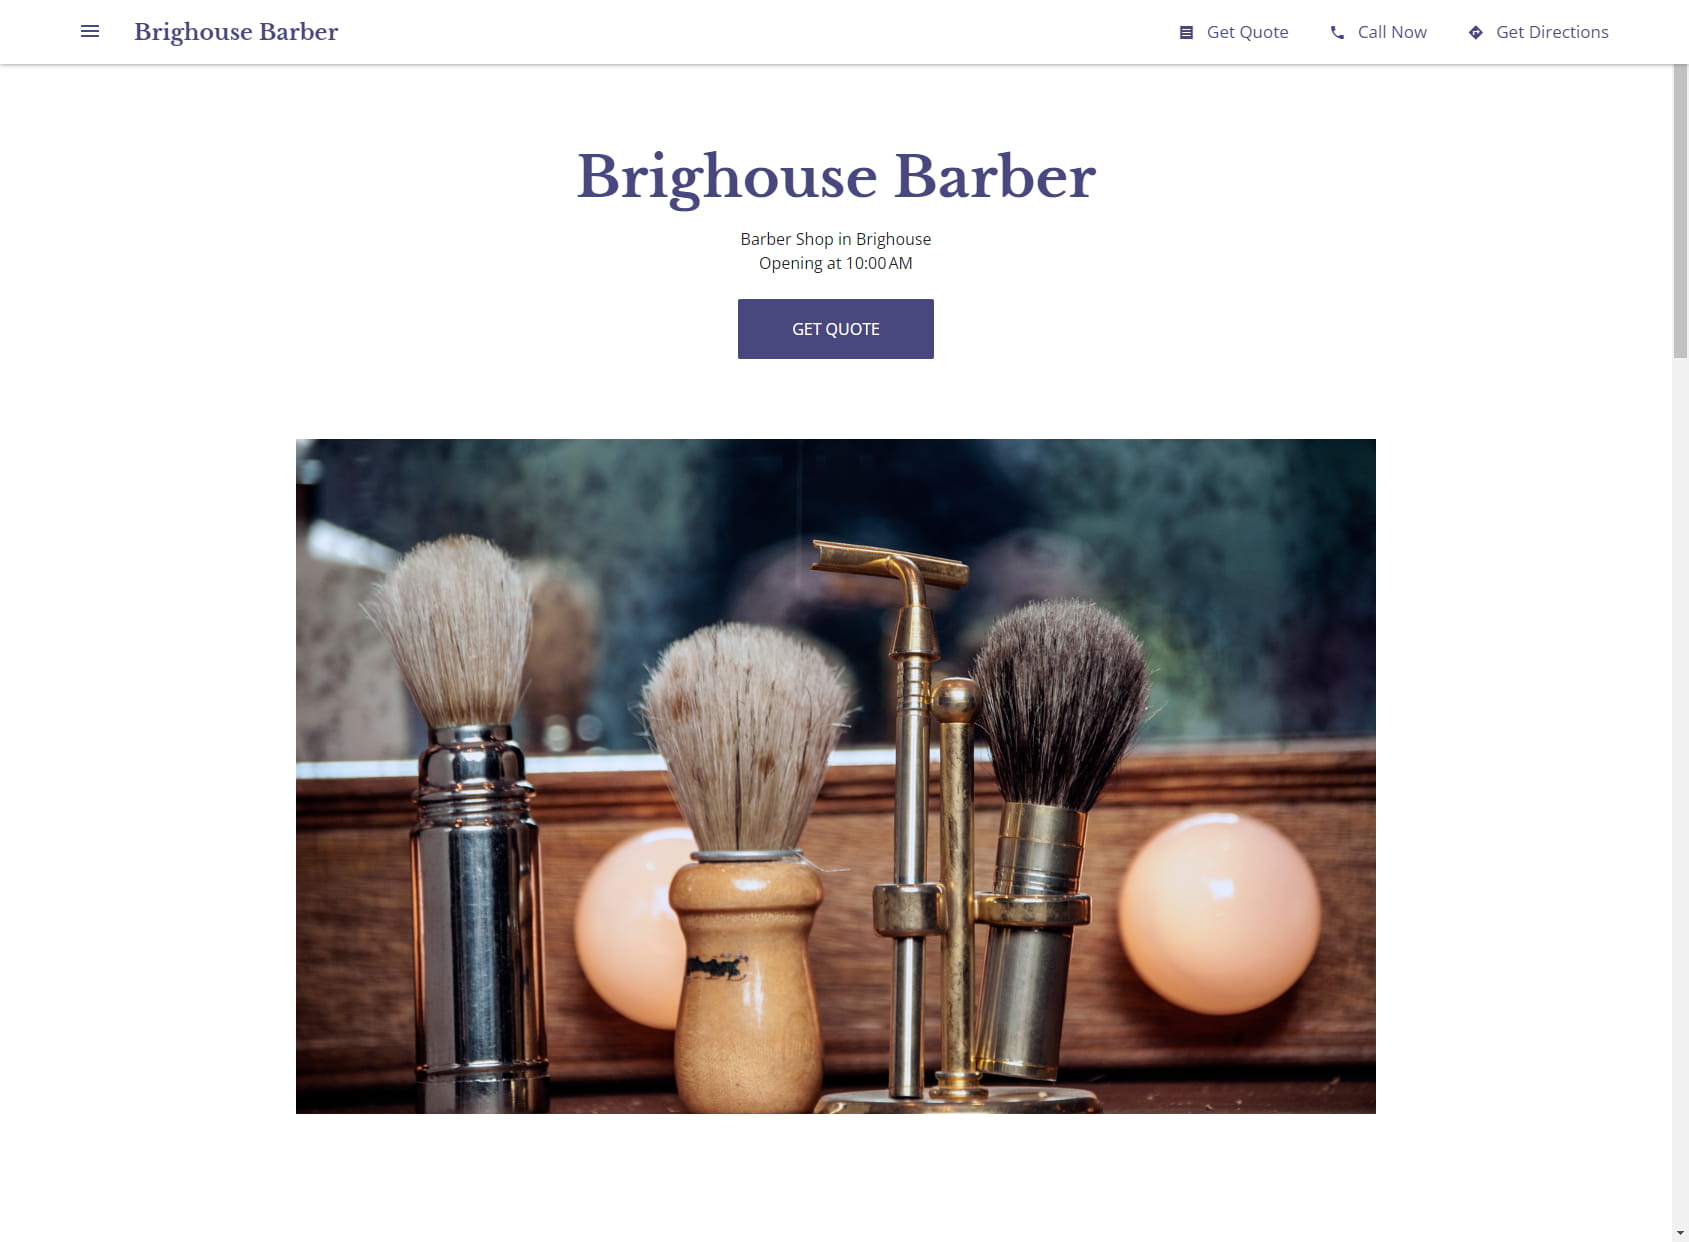 Brighouse Barber